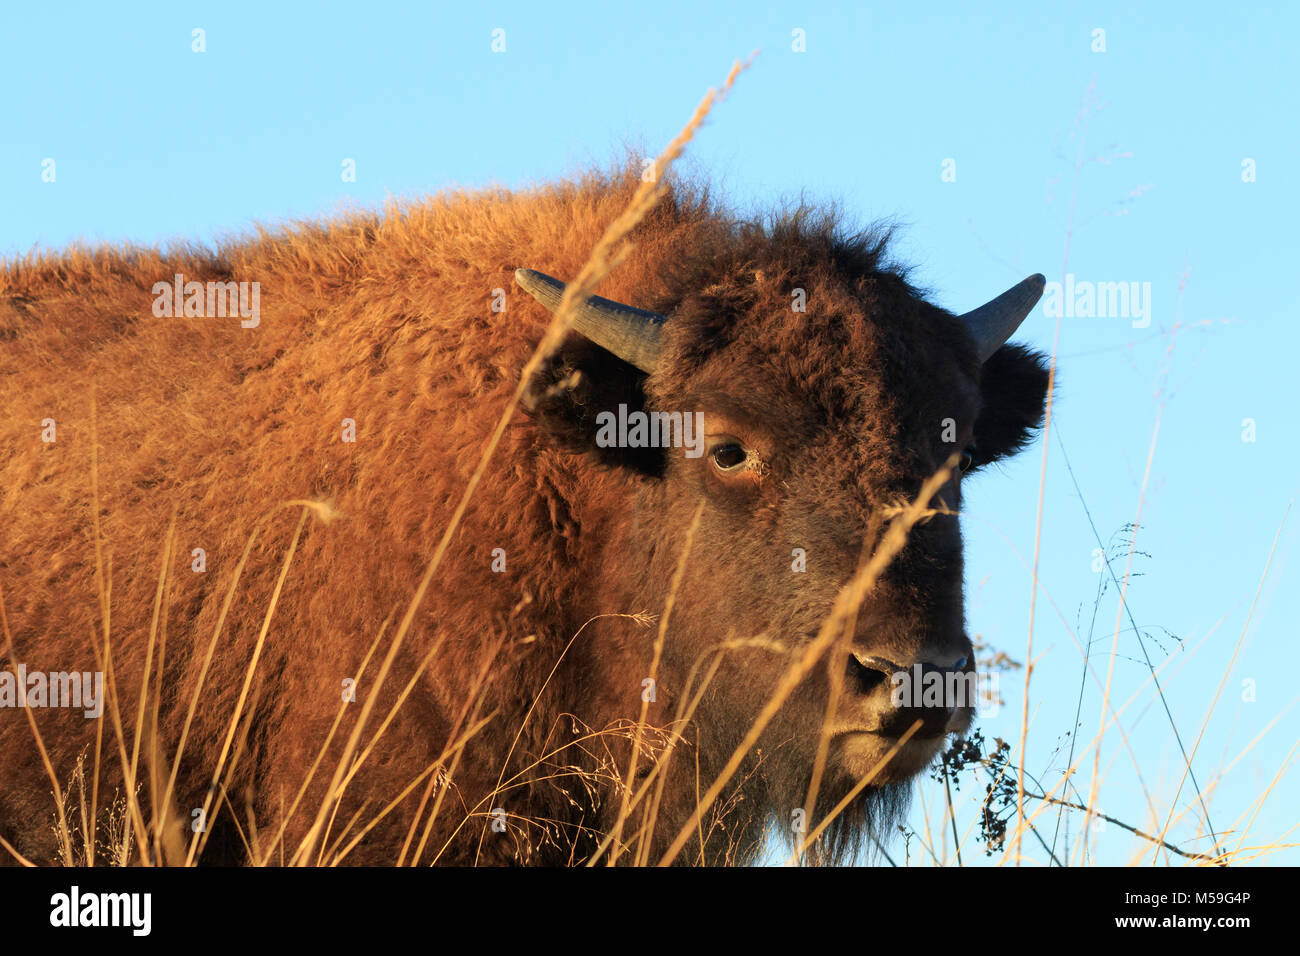 An American Bison lifts his head to look around the Tallgrass Prairie Preserve located in Pawkuska, Oklahoma 2018 Stock Photo